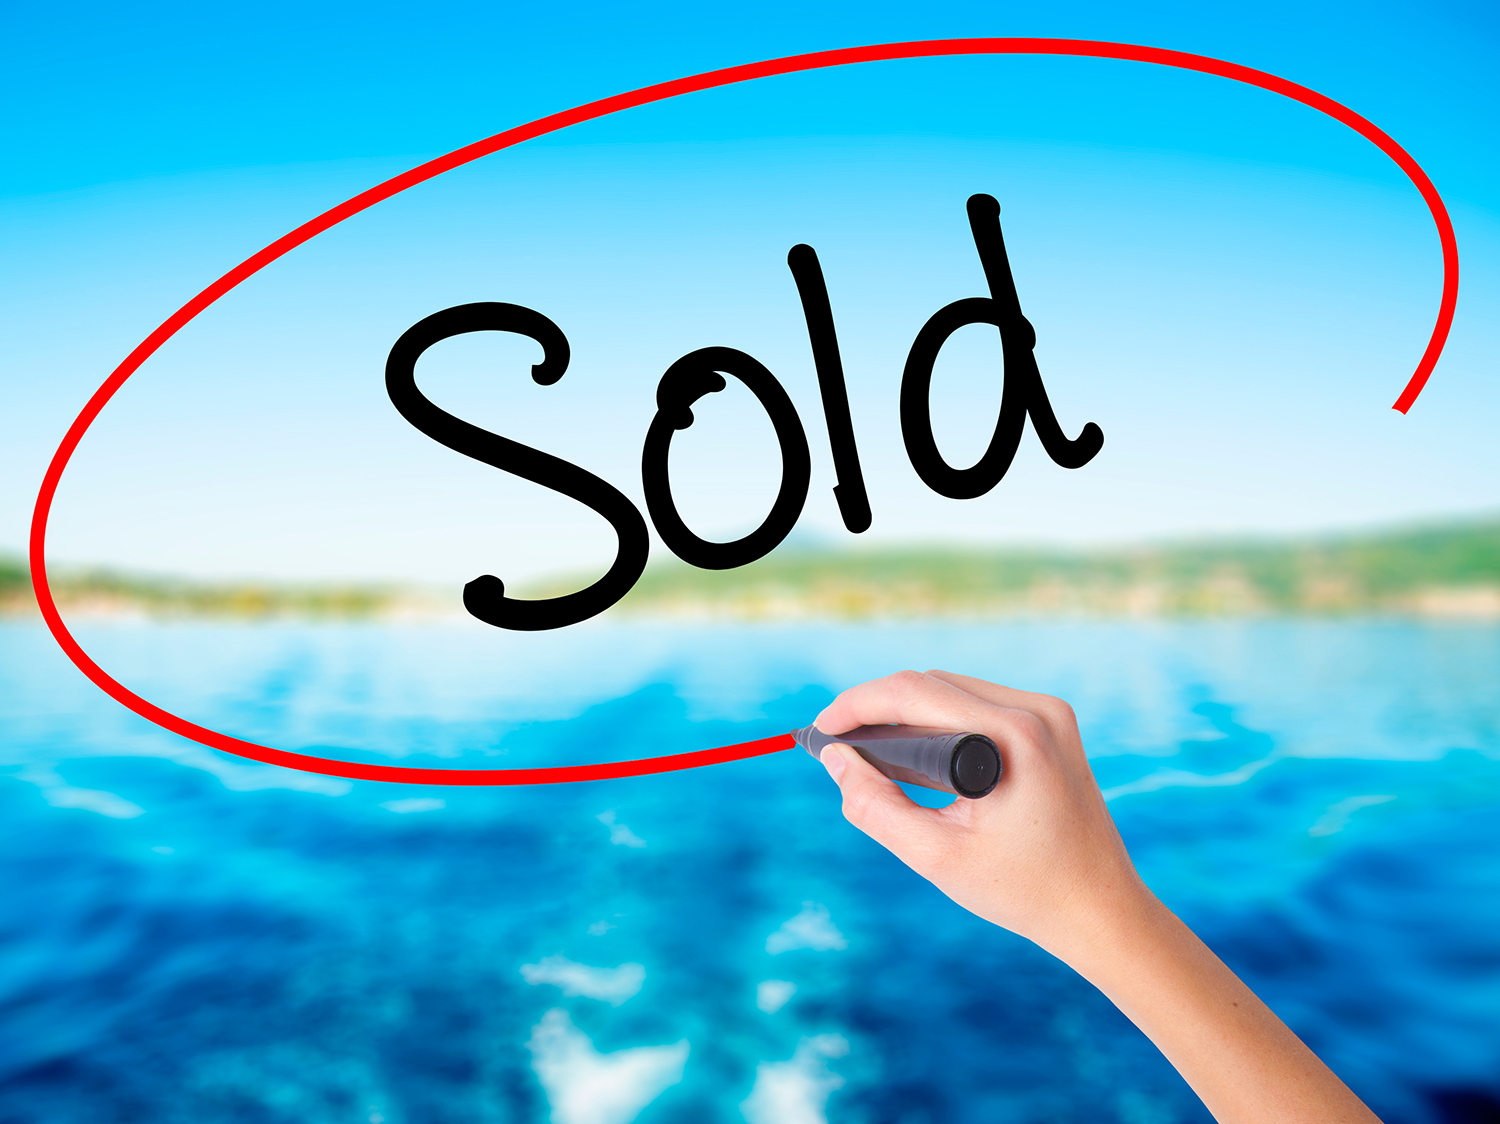 How To Sell A Boat: The Complete Guide